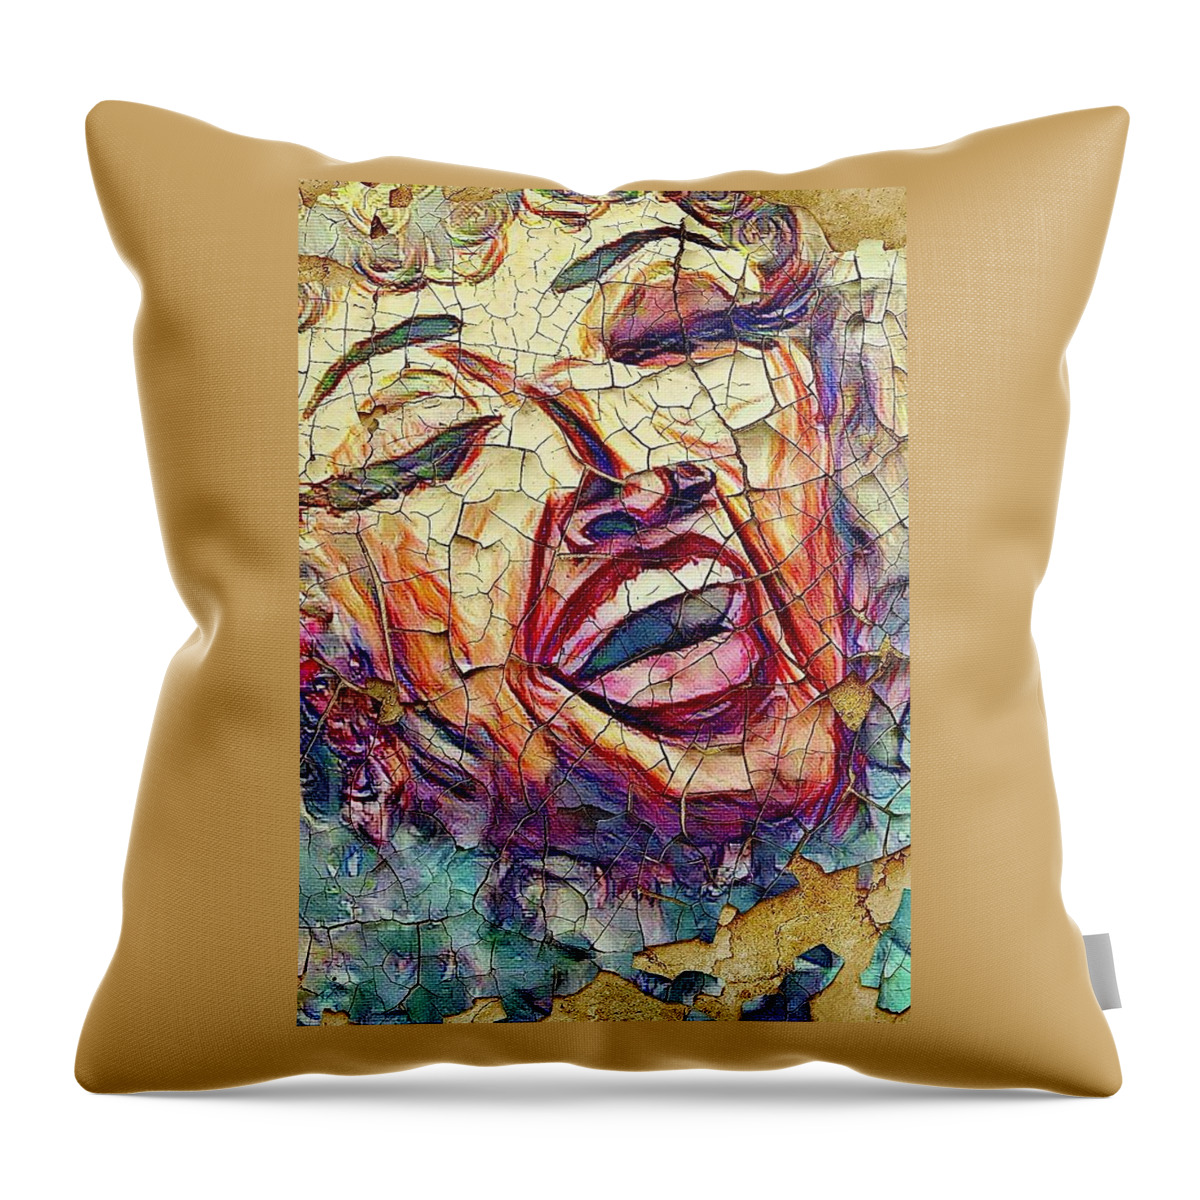  Throw Pillow featuring the mixed media Old Friend by Angie ONeal